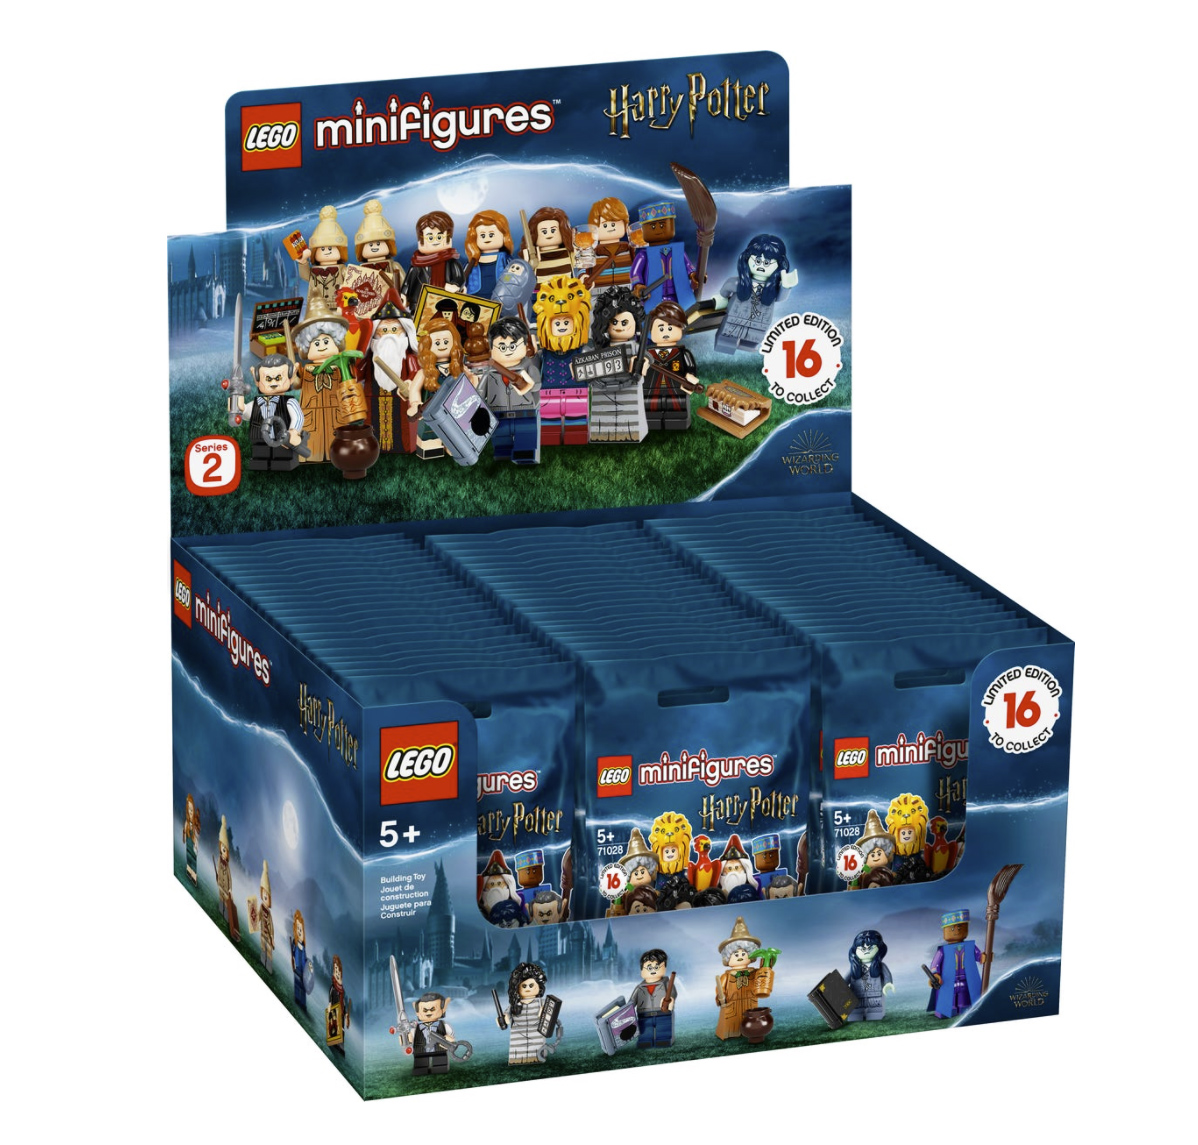 LEGO® 71028 Harry Potter Series 2 Complete Box